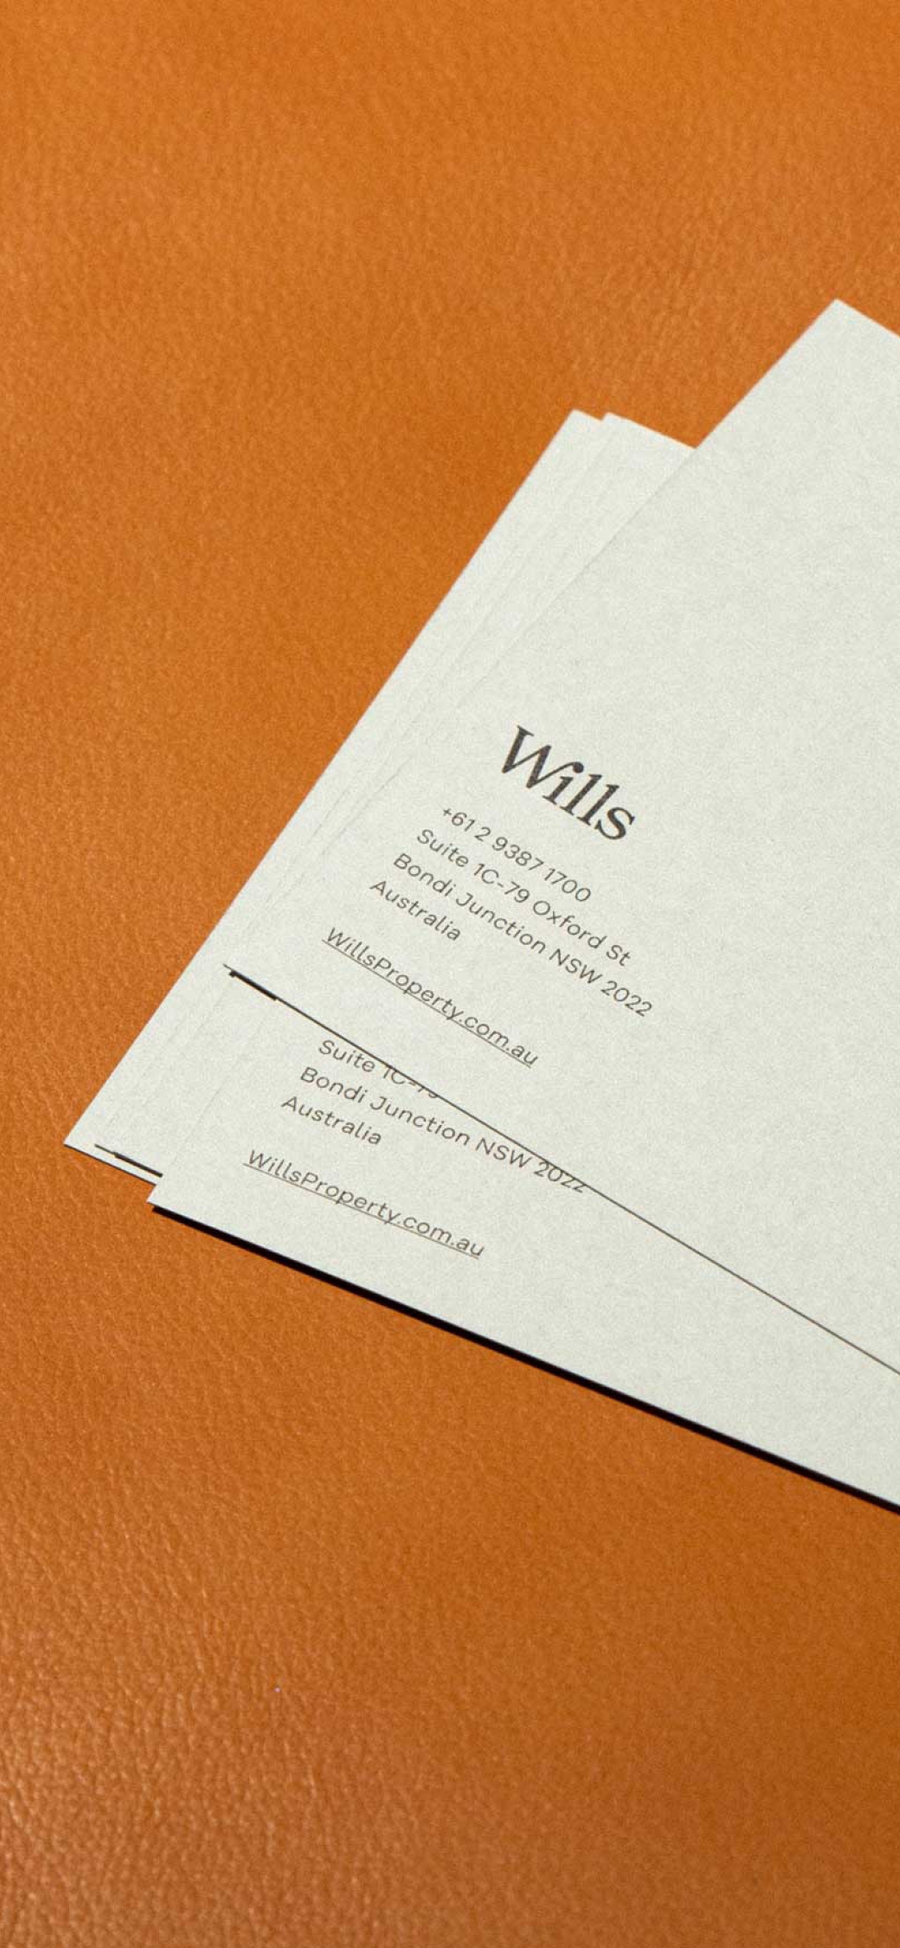 Wills Property - Printed Business Card Logo and address - Brand Strategy | Atollon - a design company